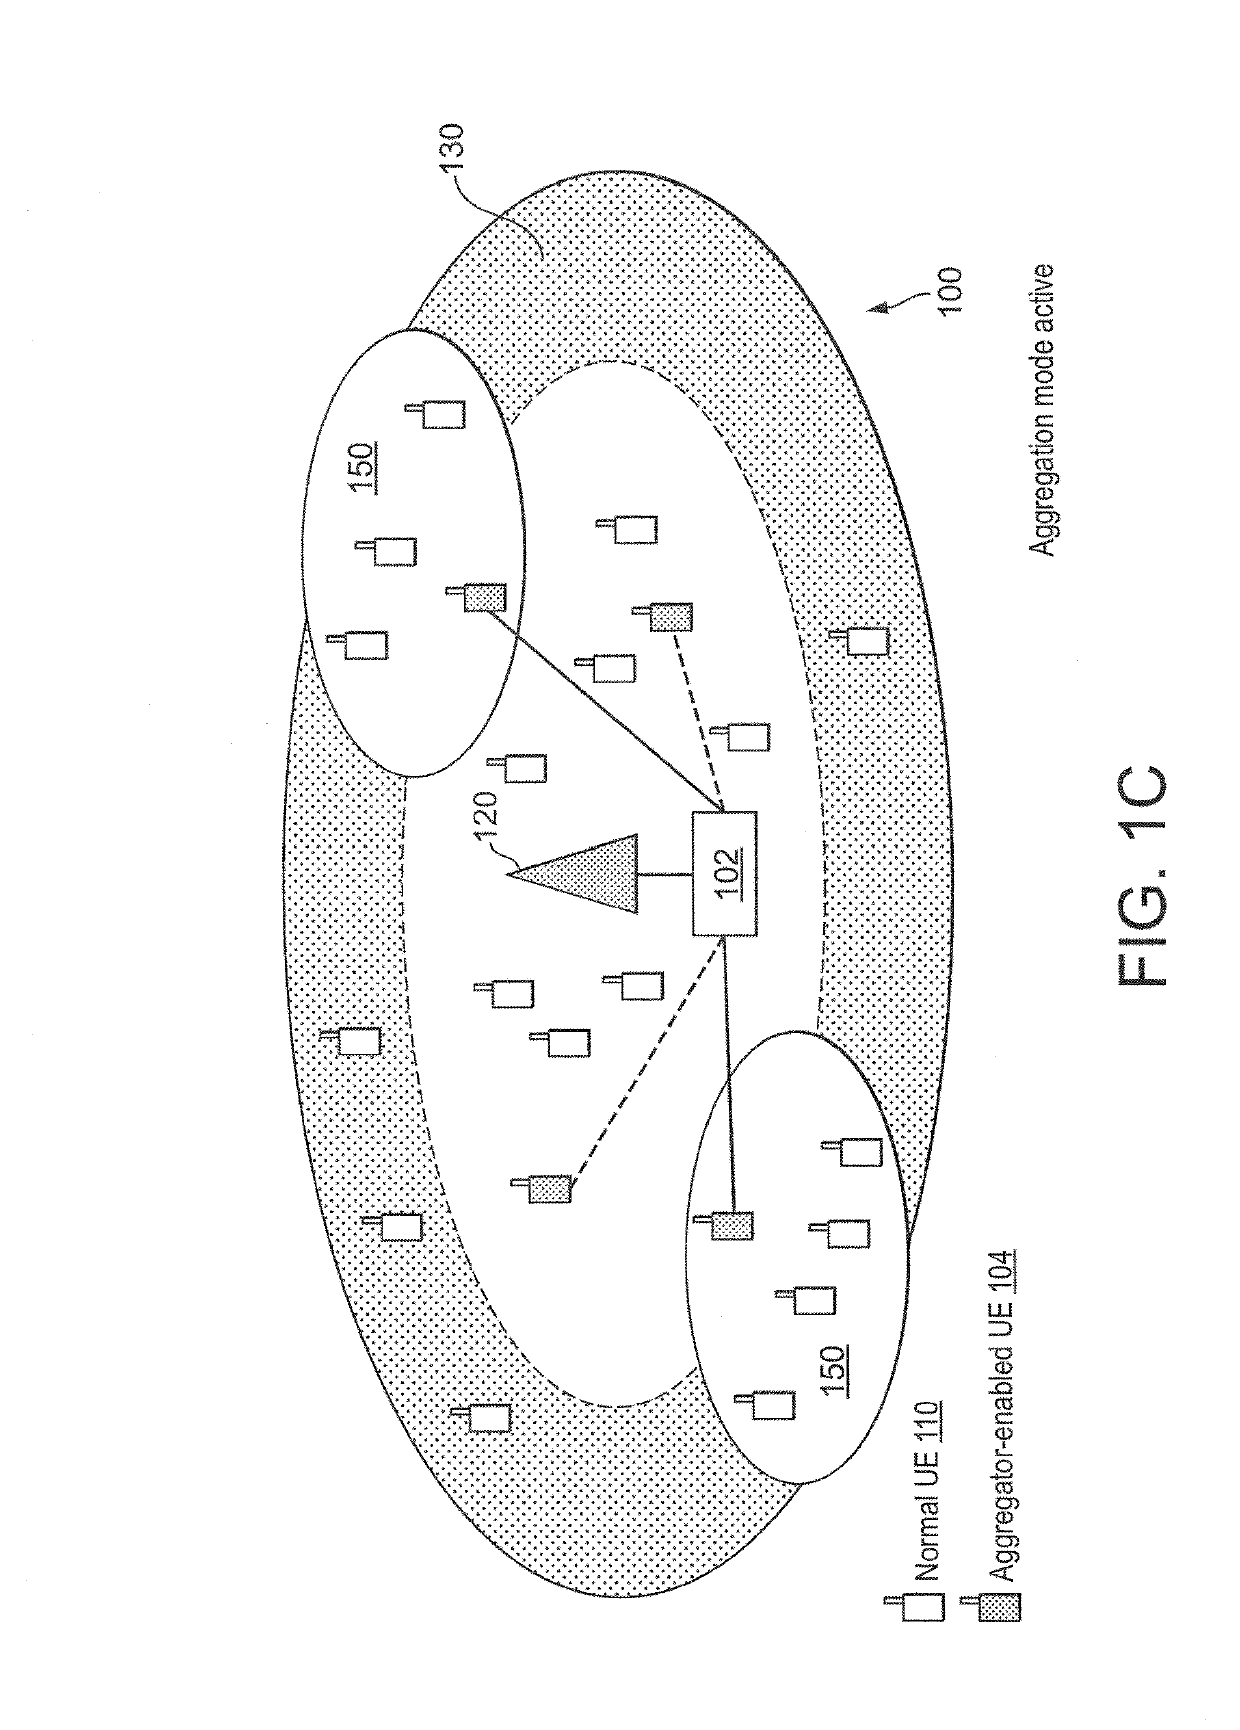 Telecommunication system for relaying cellular coverage